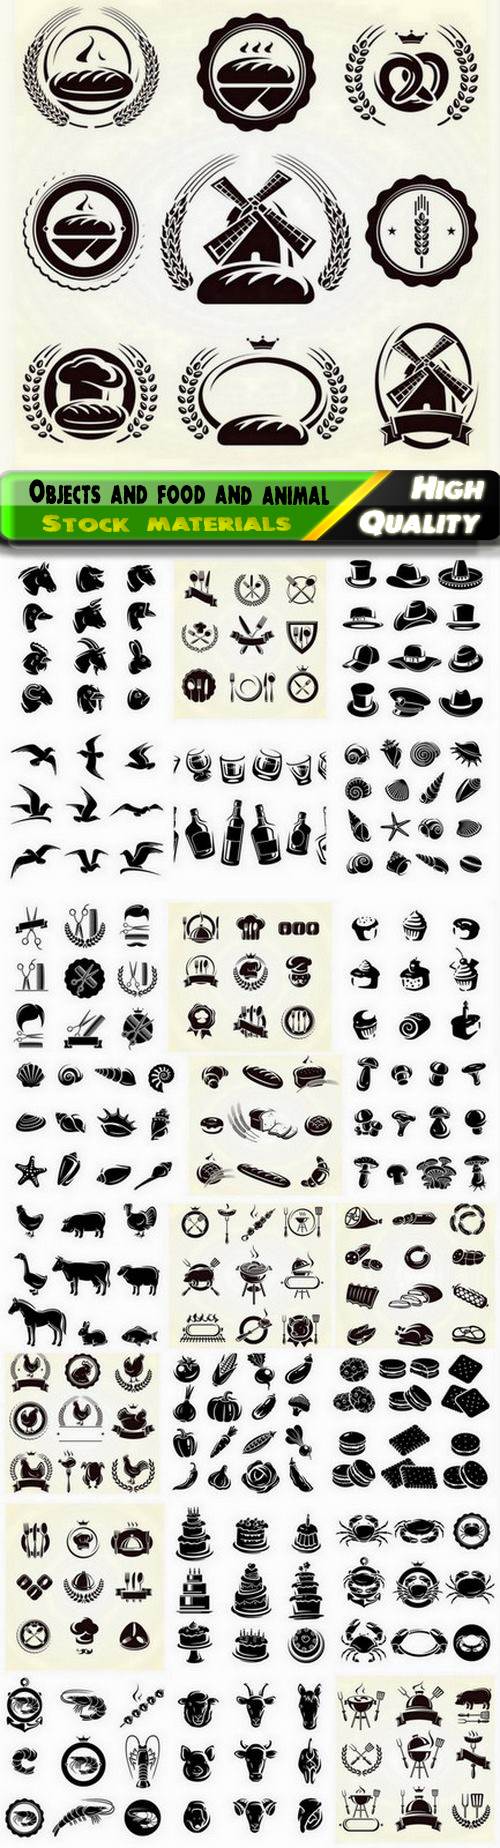 Set of different objects and food and animal icon silhouettes - 25 Eps